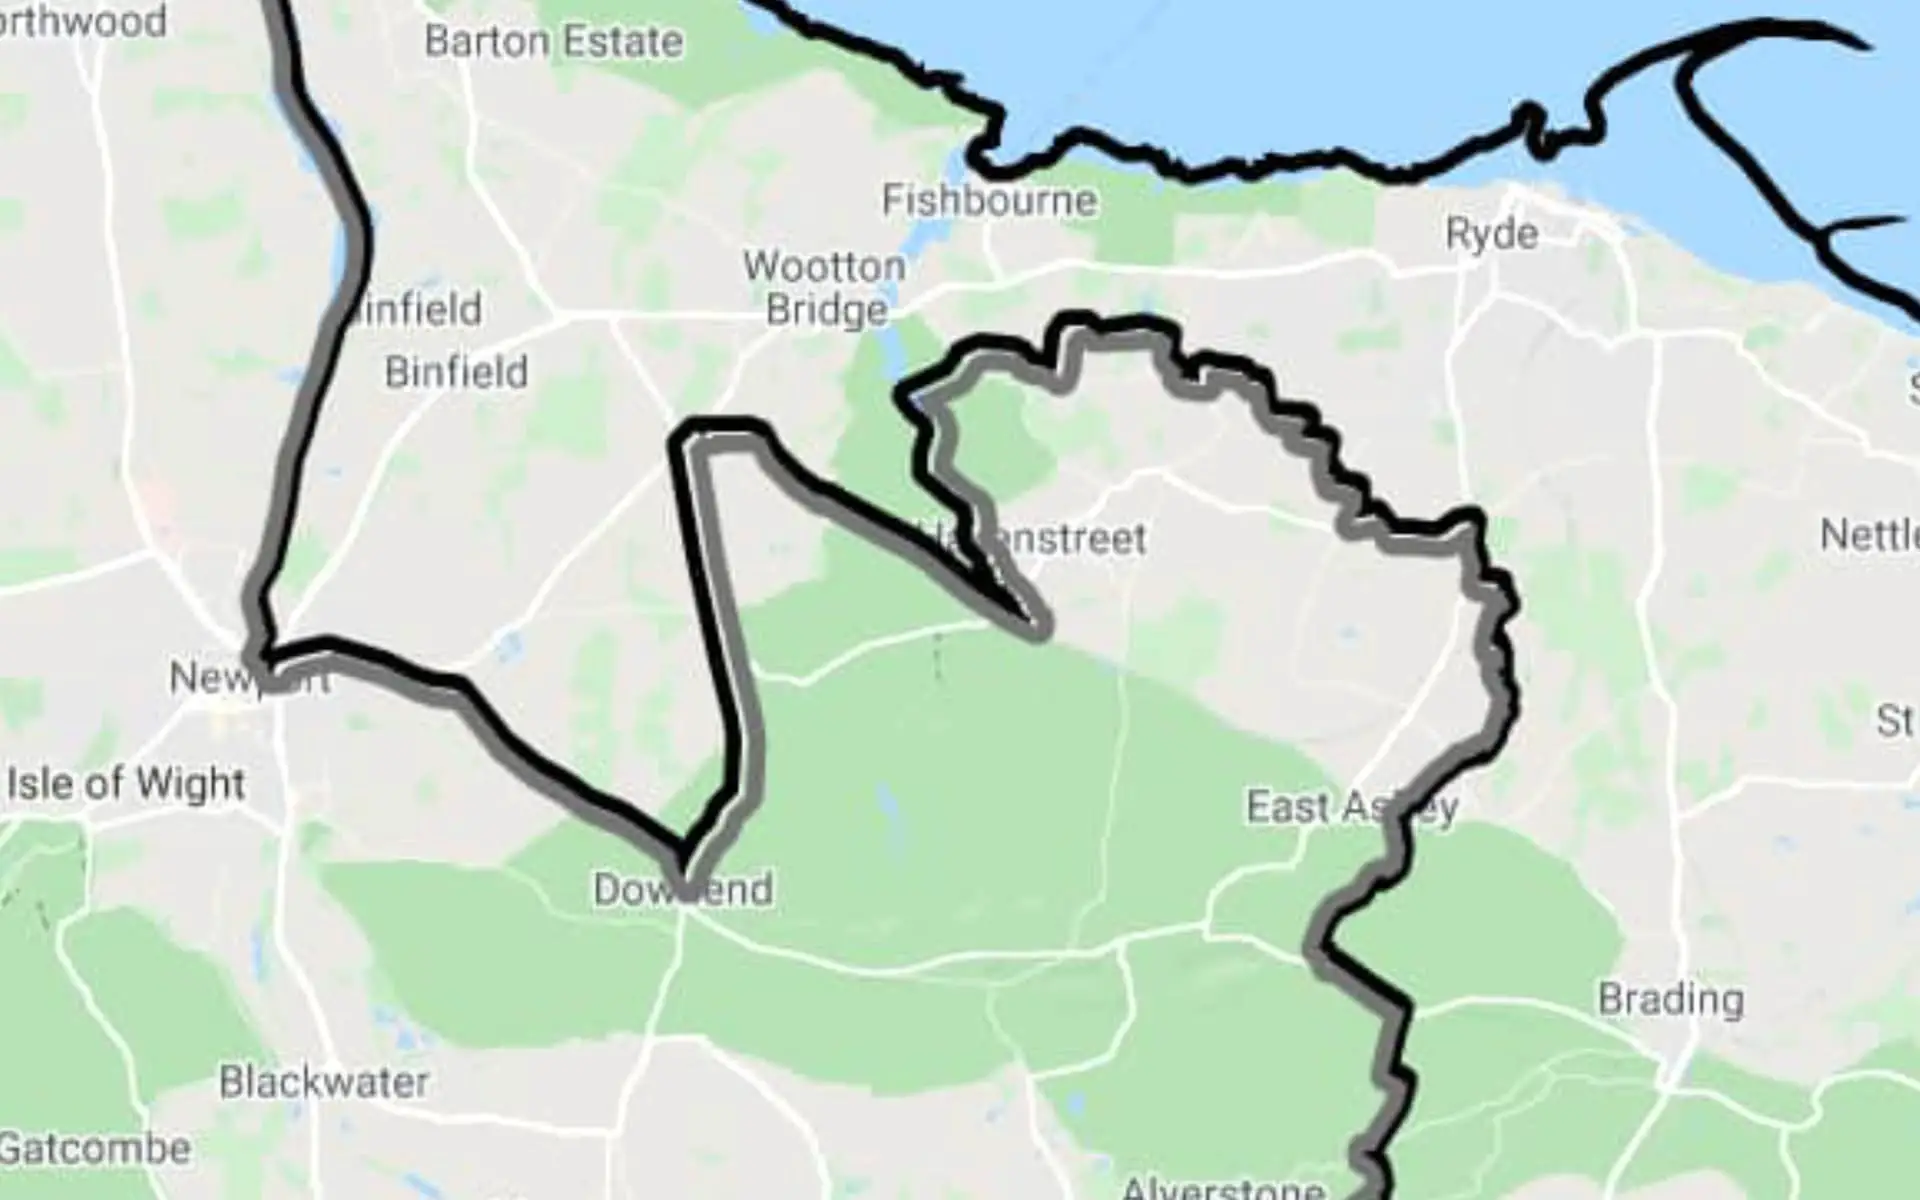 Google map with boundary for two constituencies